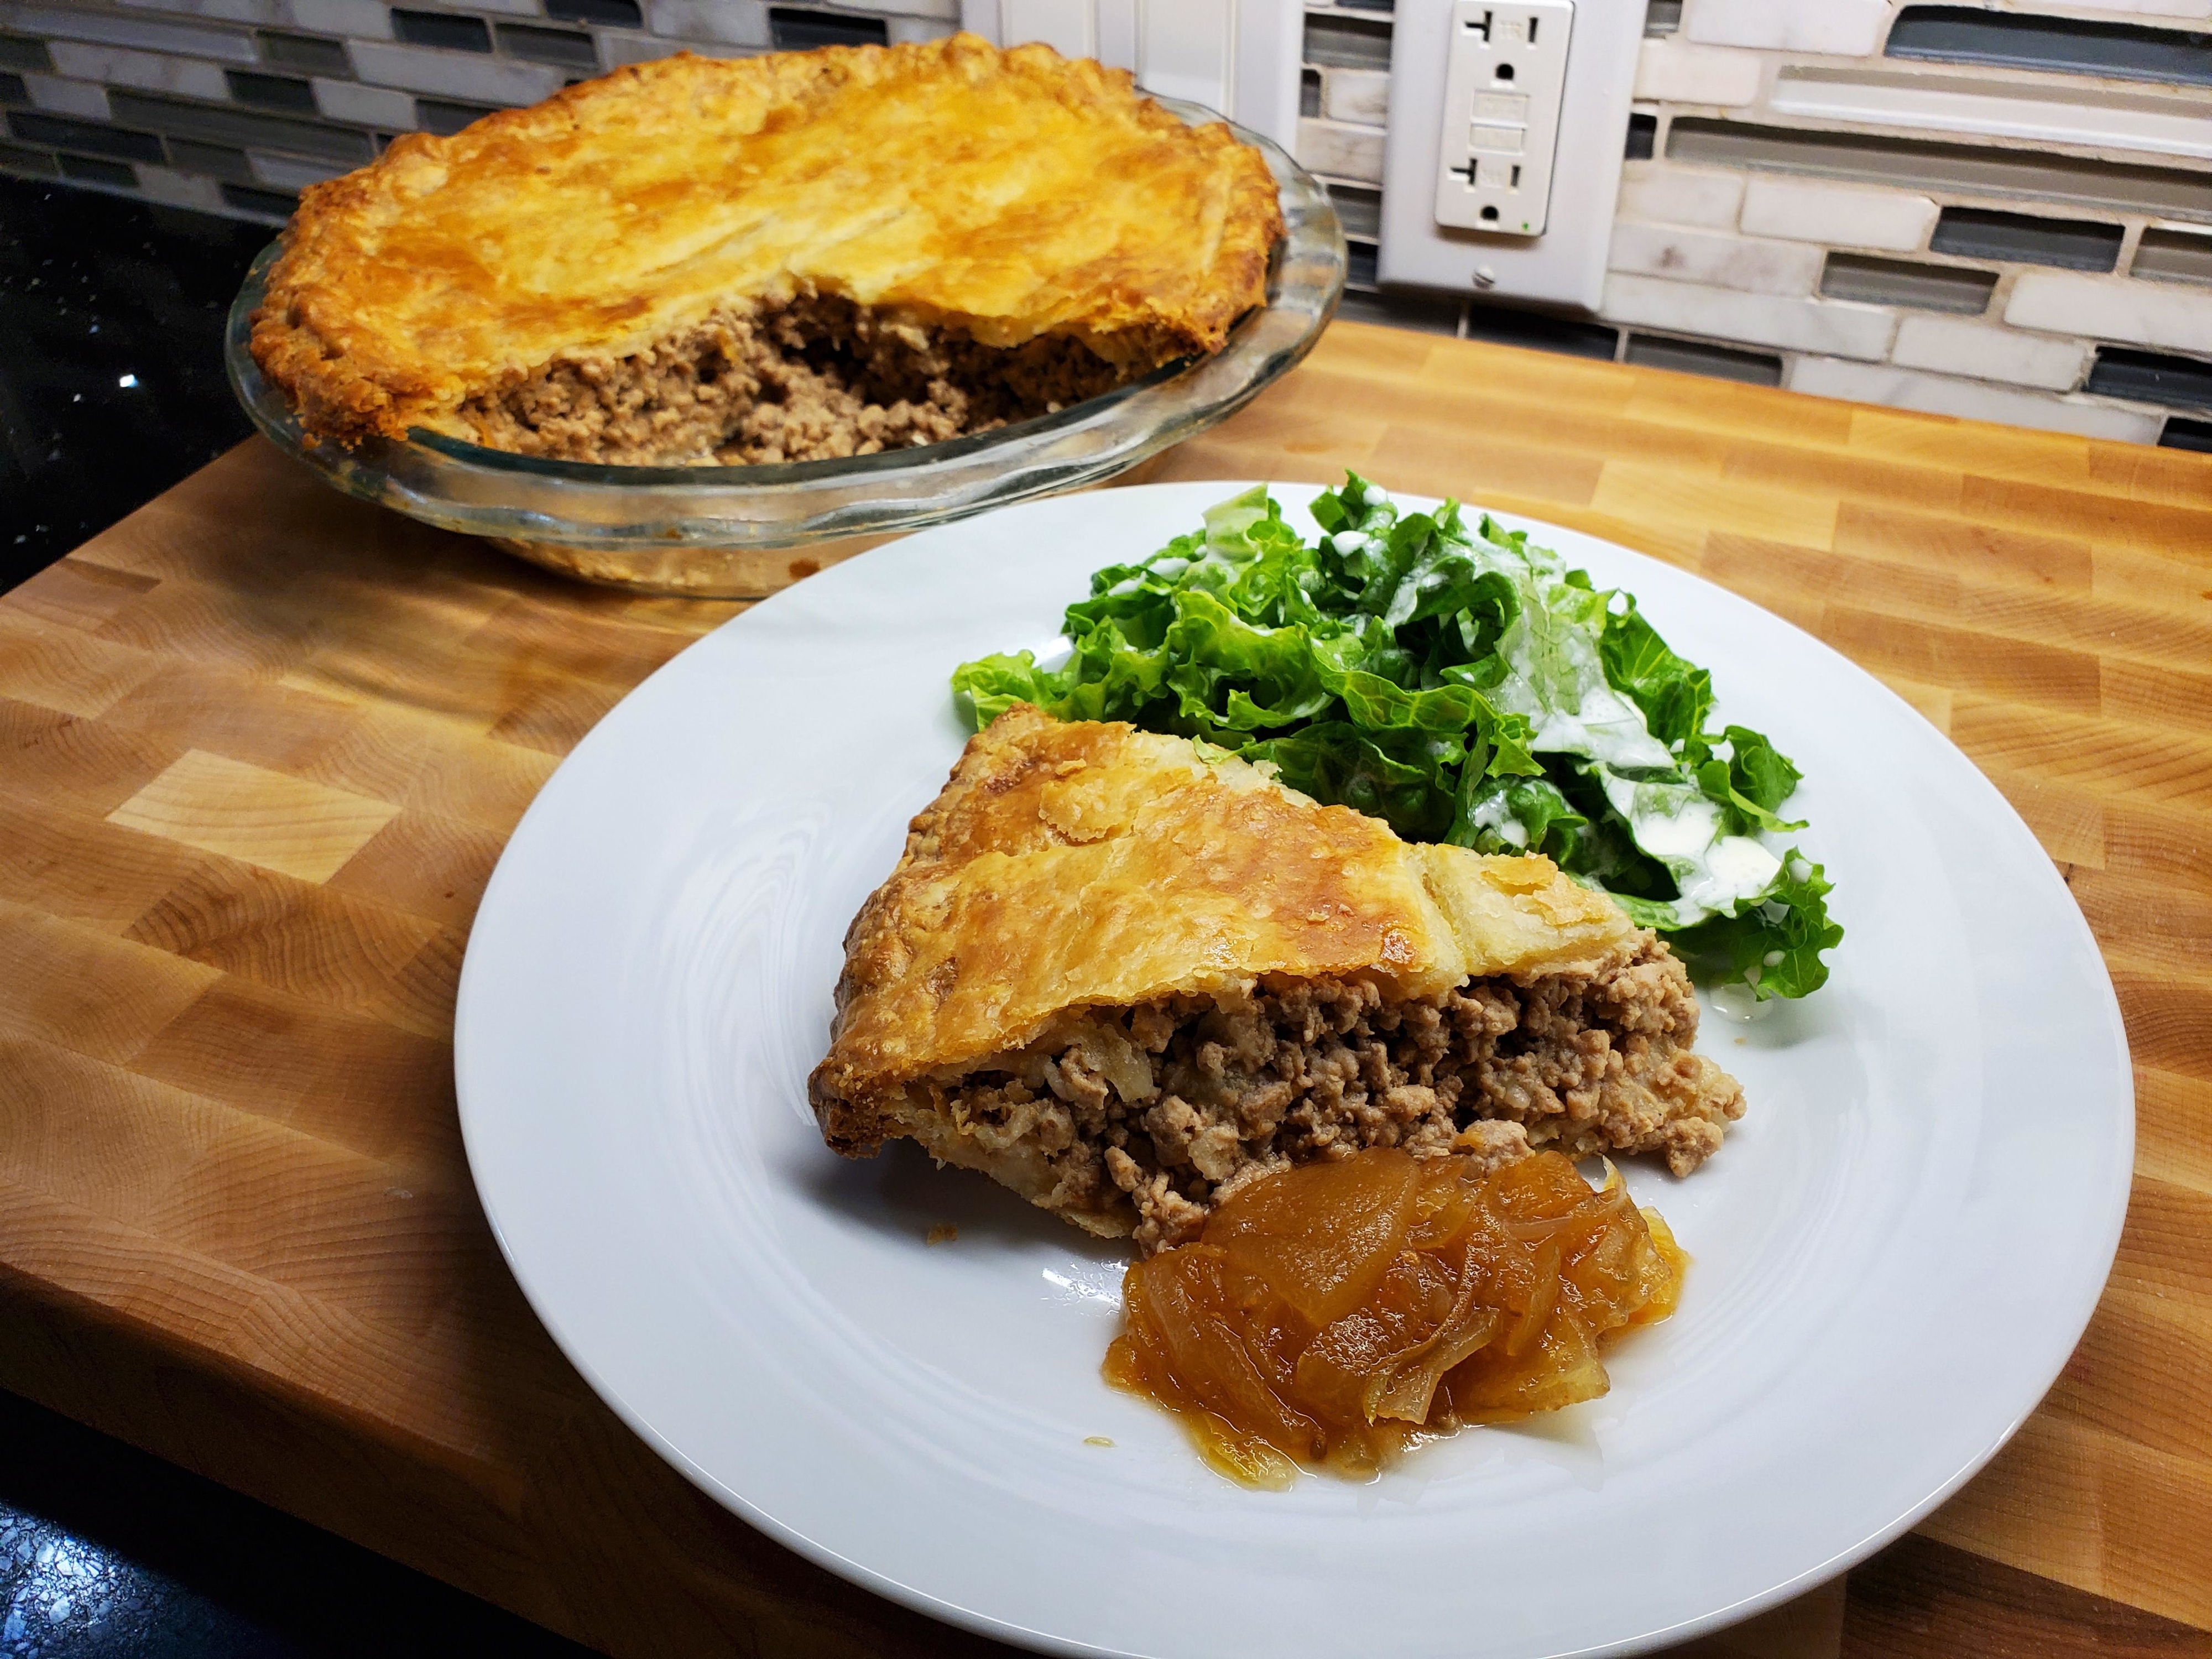 A slice of tourtière on a plate next to a leafy salad